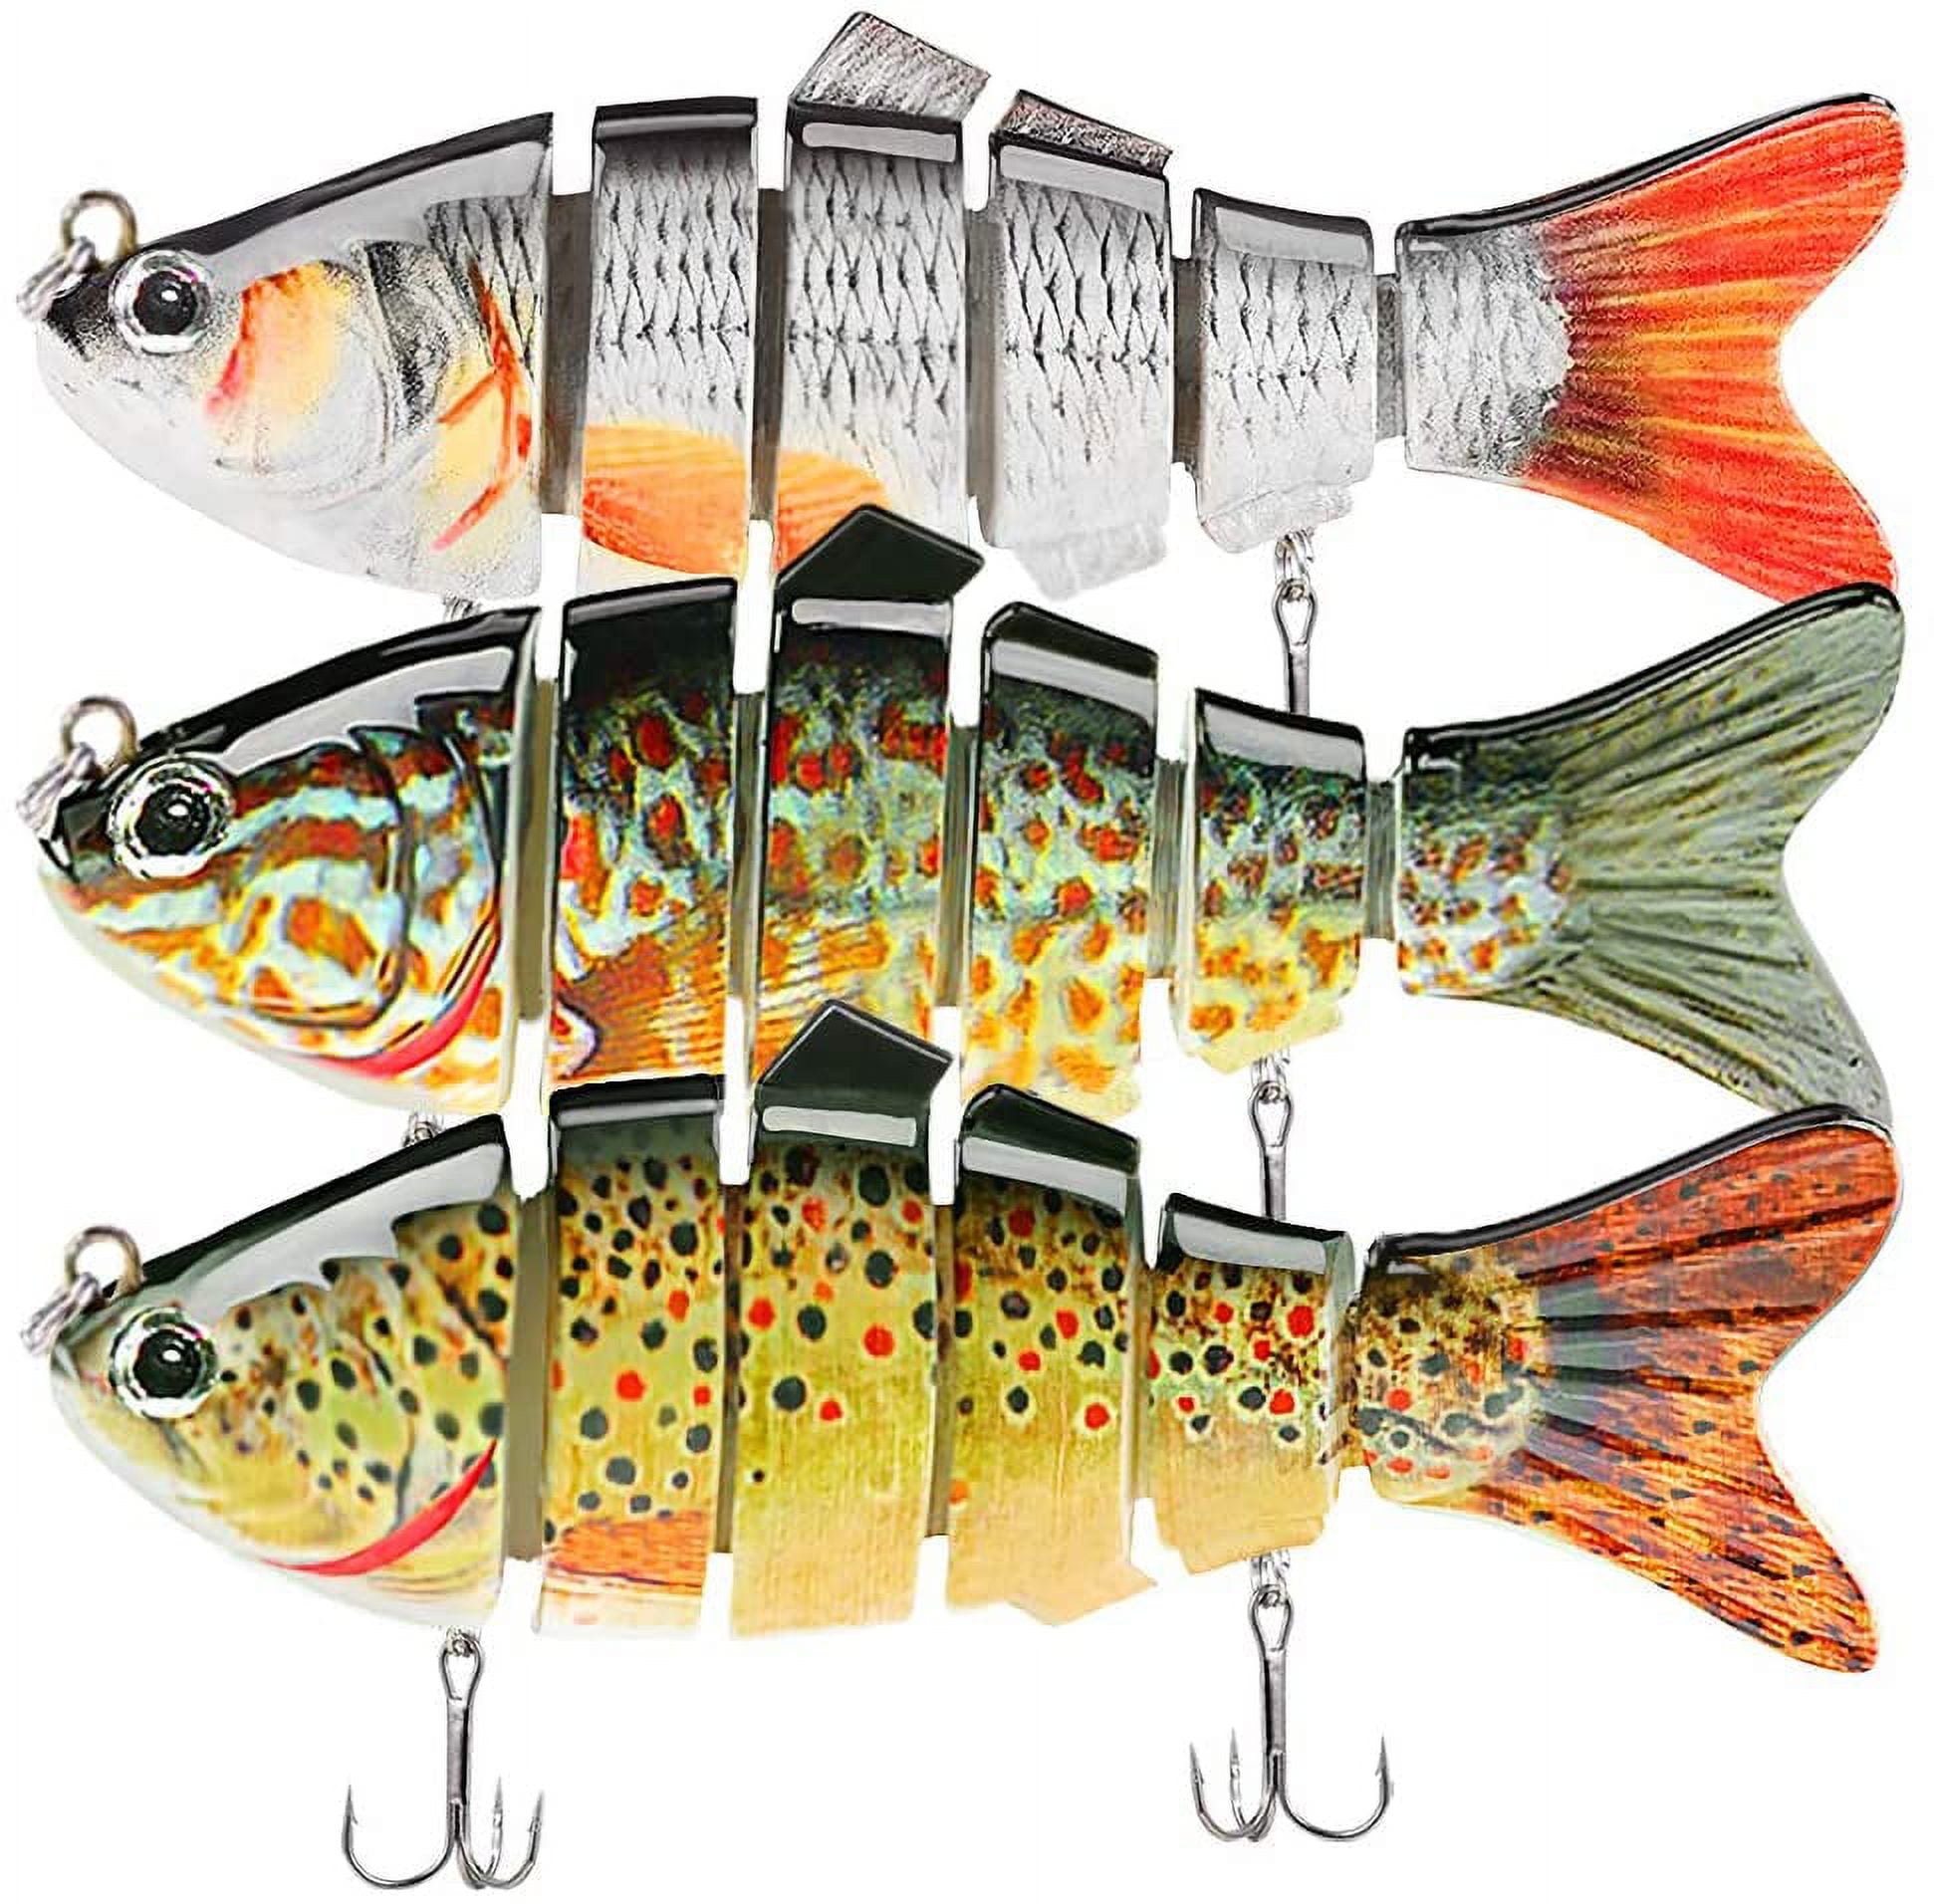 Herrnalise Fishing Lures for Freshwater and Saltwater, Lifelike Swimbait  for Bass Trout Crappie, Slow Sinking Bass Fishing Lure, Amazing Fishing  Gifts